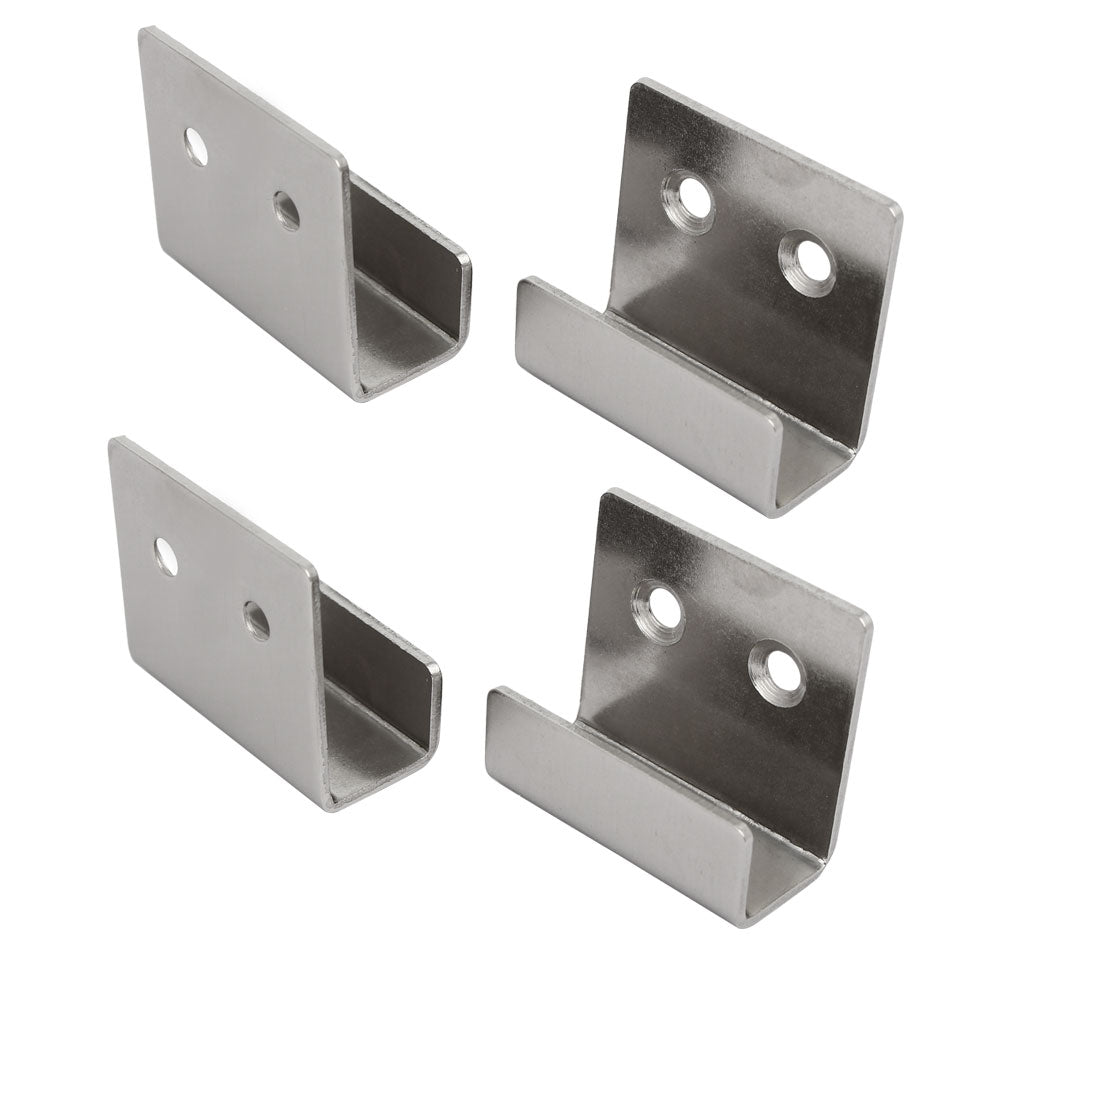 uxcell Uxcell Tile Display Stainless Steel Wall Hanger Bracket Silver Tone 4pcs